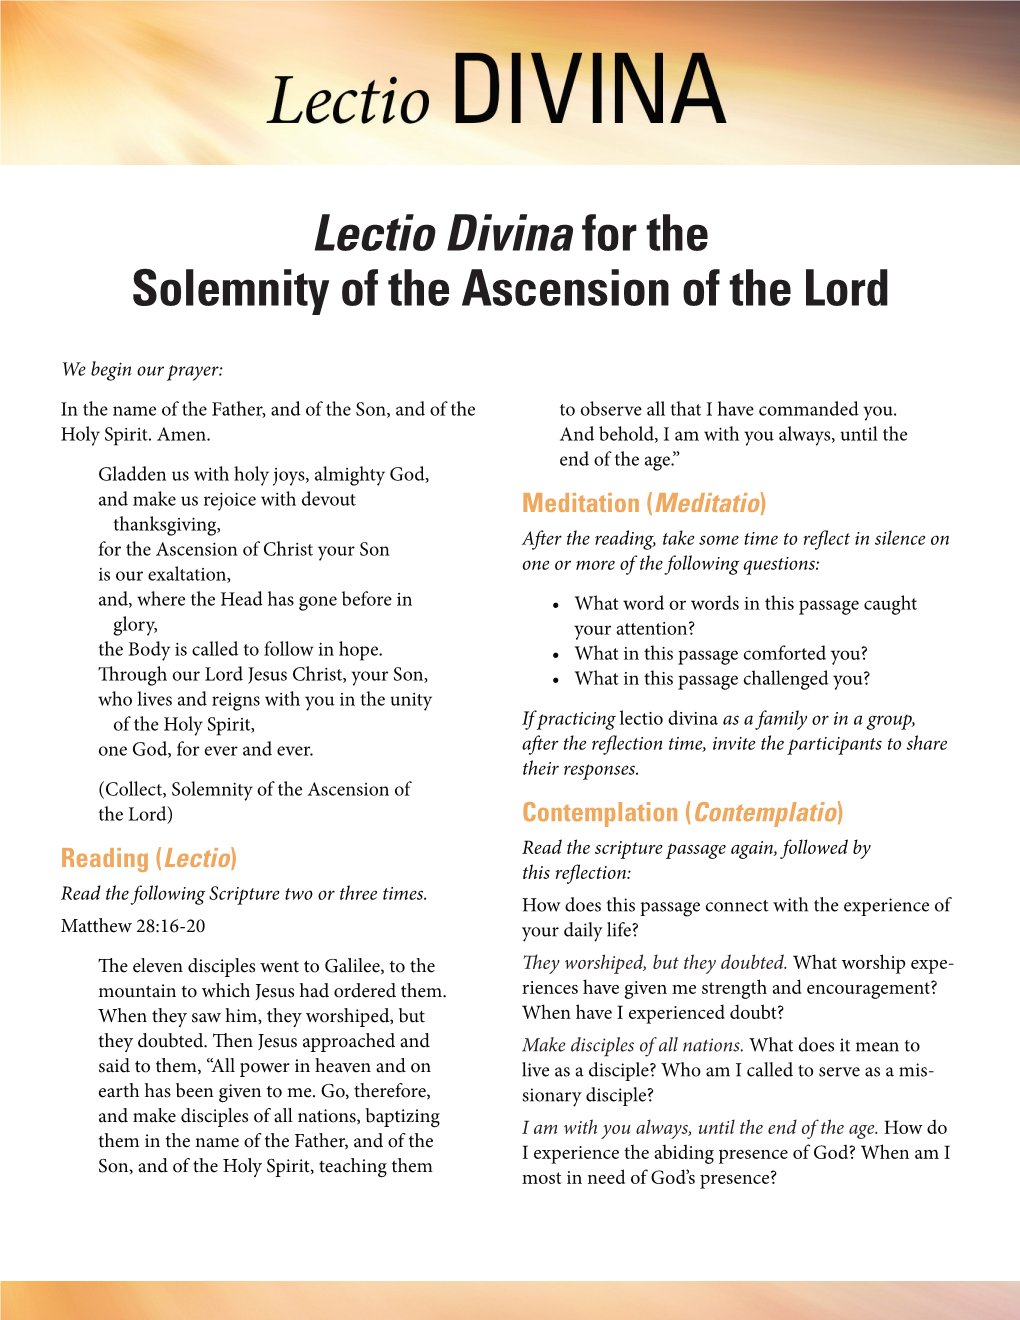 Lectio Divina for the Solemnity of the Ascension of the Lord